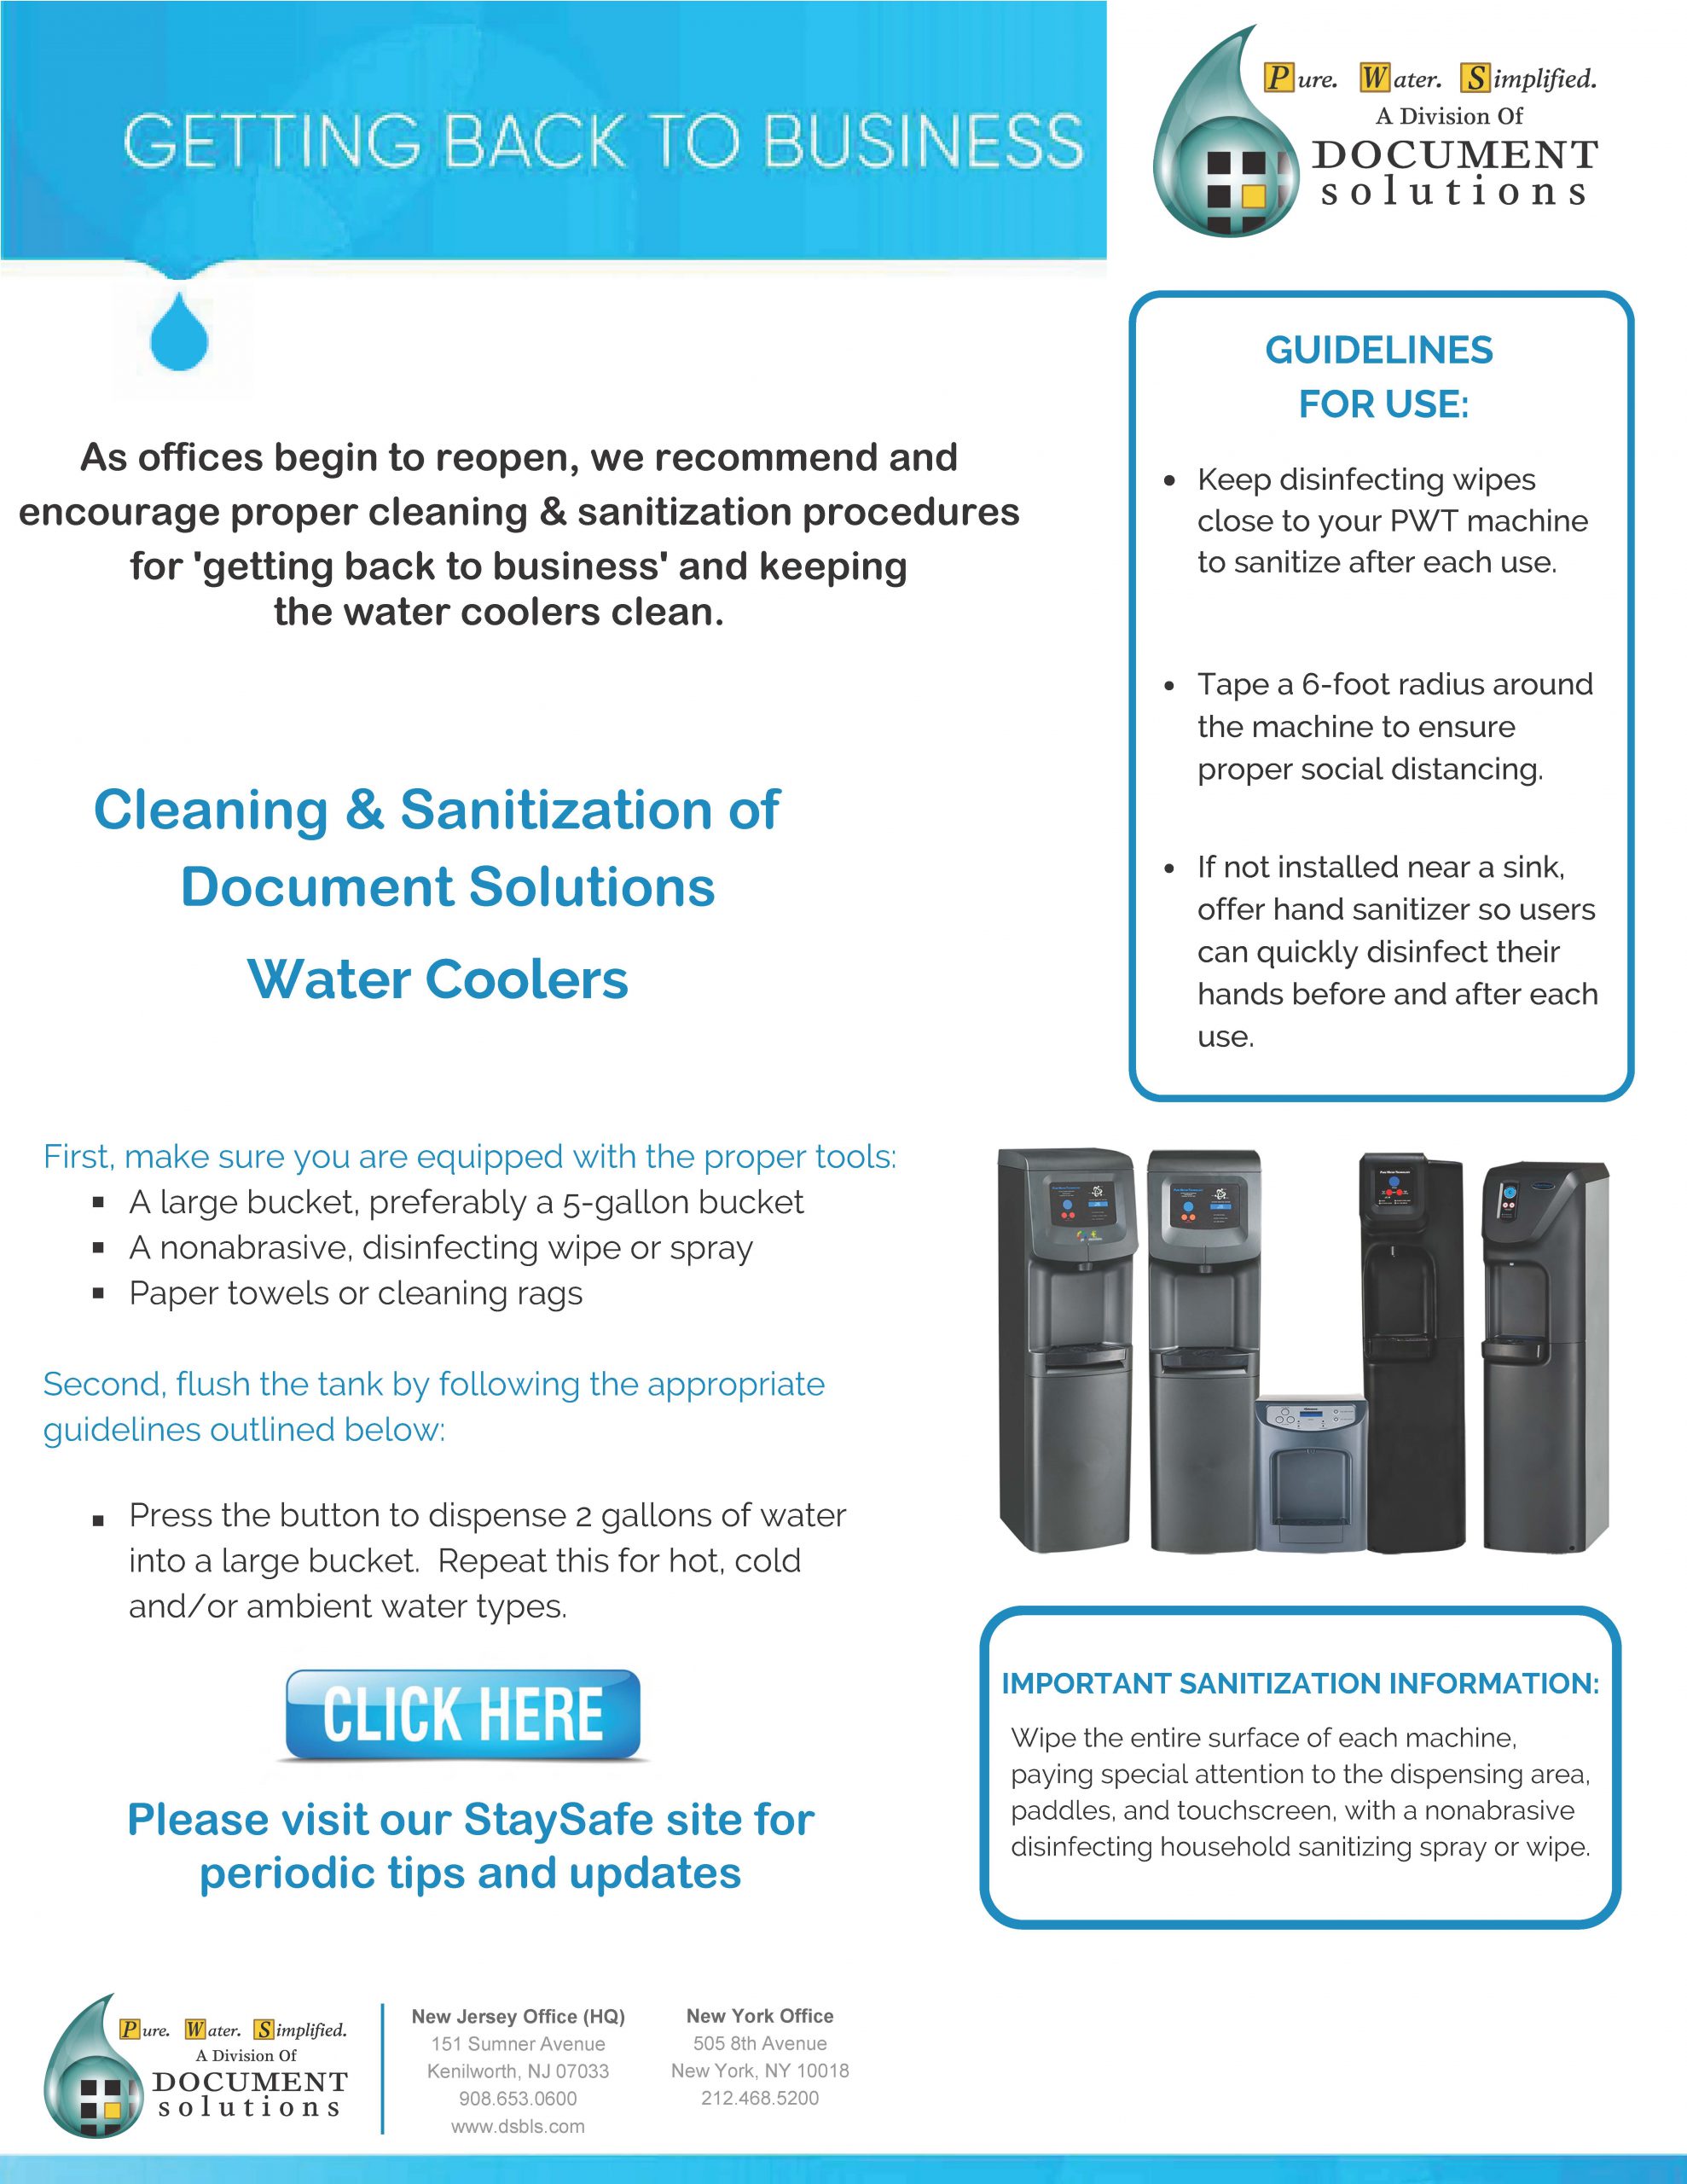 guide to getting back to business with office water cooler cleaning